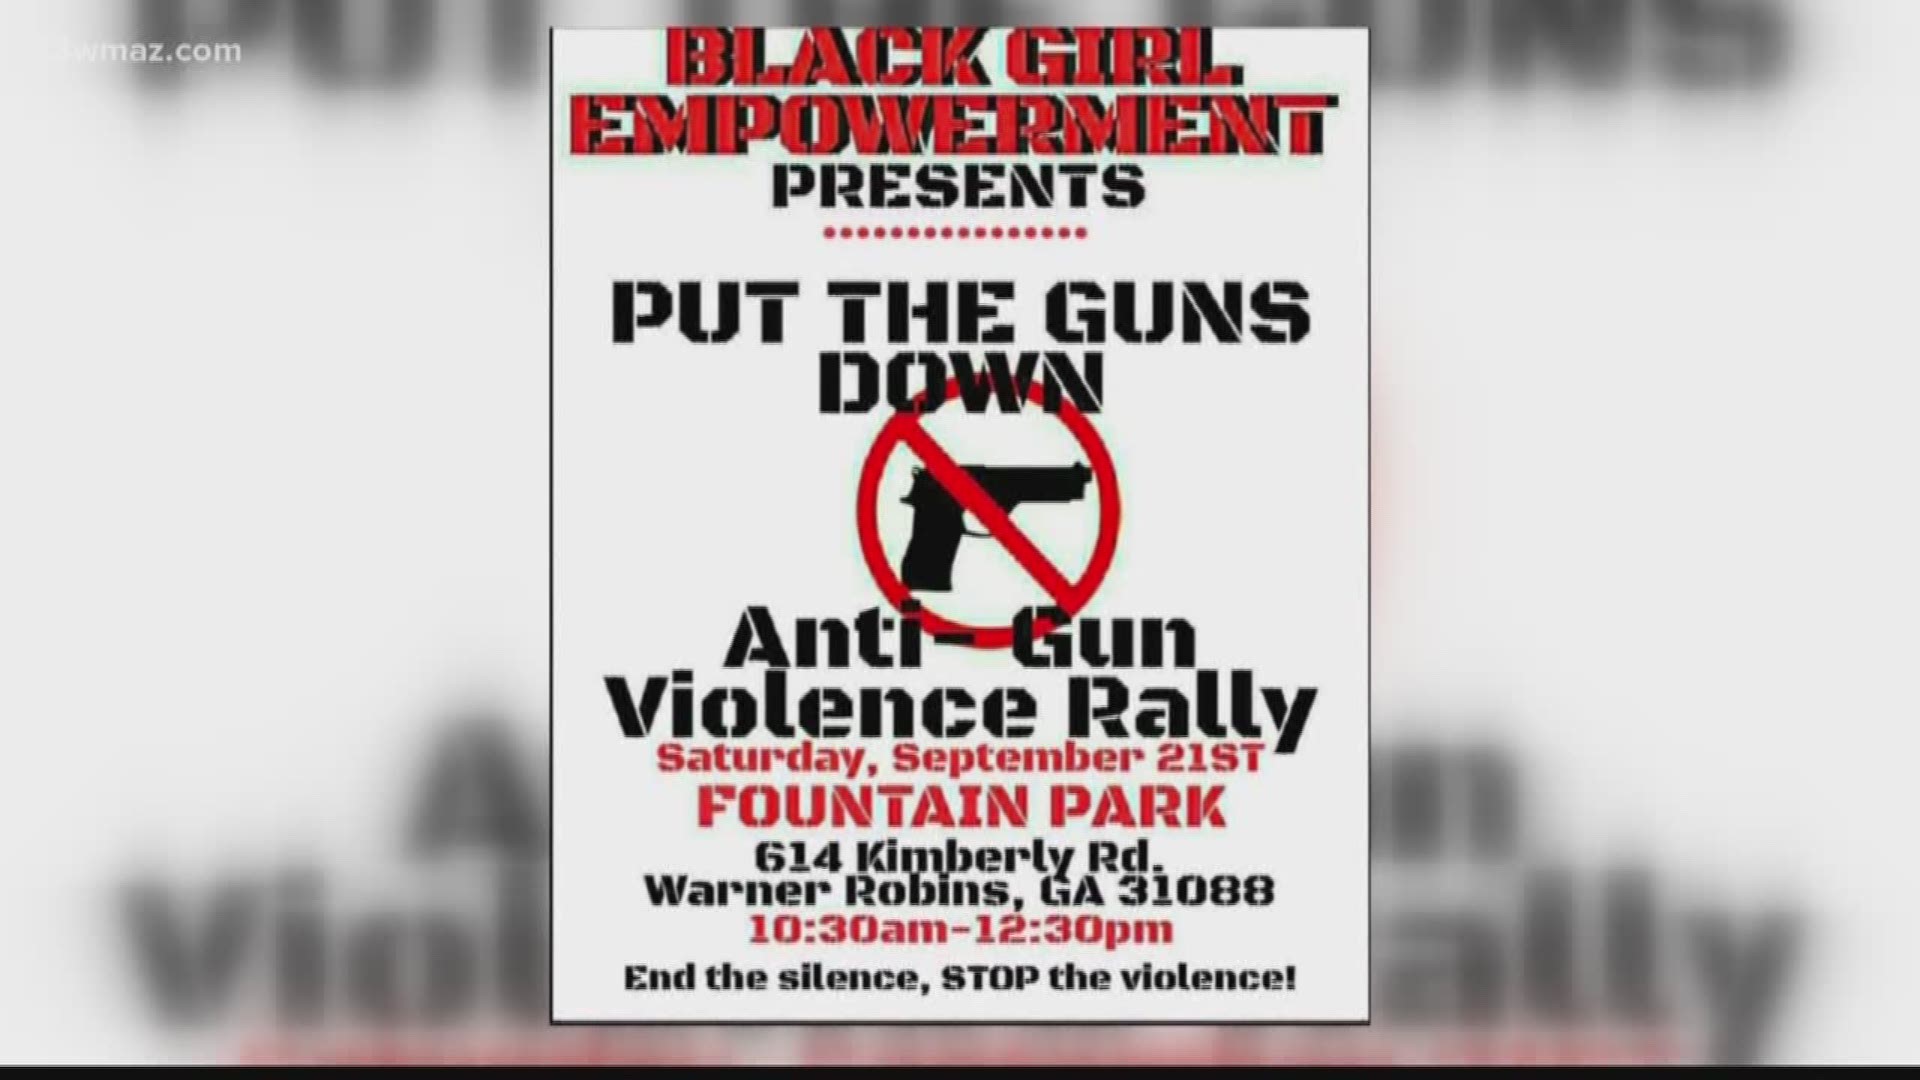 A Houston County woman is organizing an anti-gun violence rally after watching her teenage sister grieve over the loss of a friend.